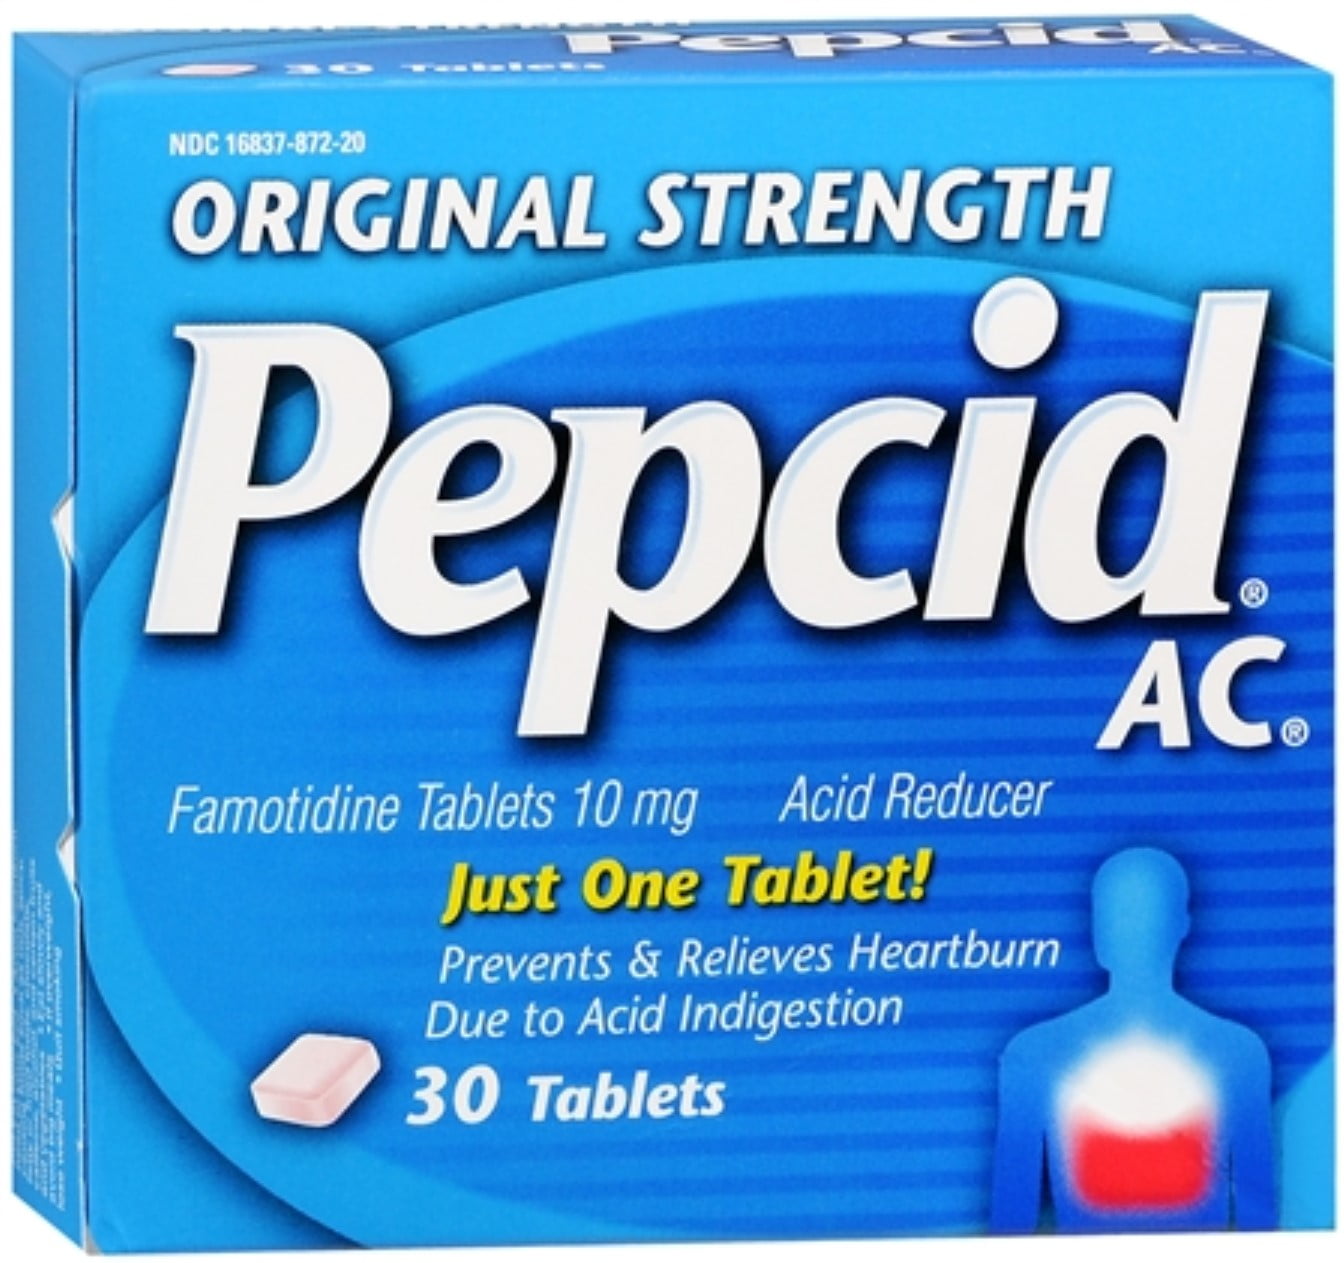 is pepcid ac the same as pepcid complete